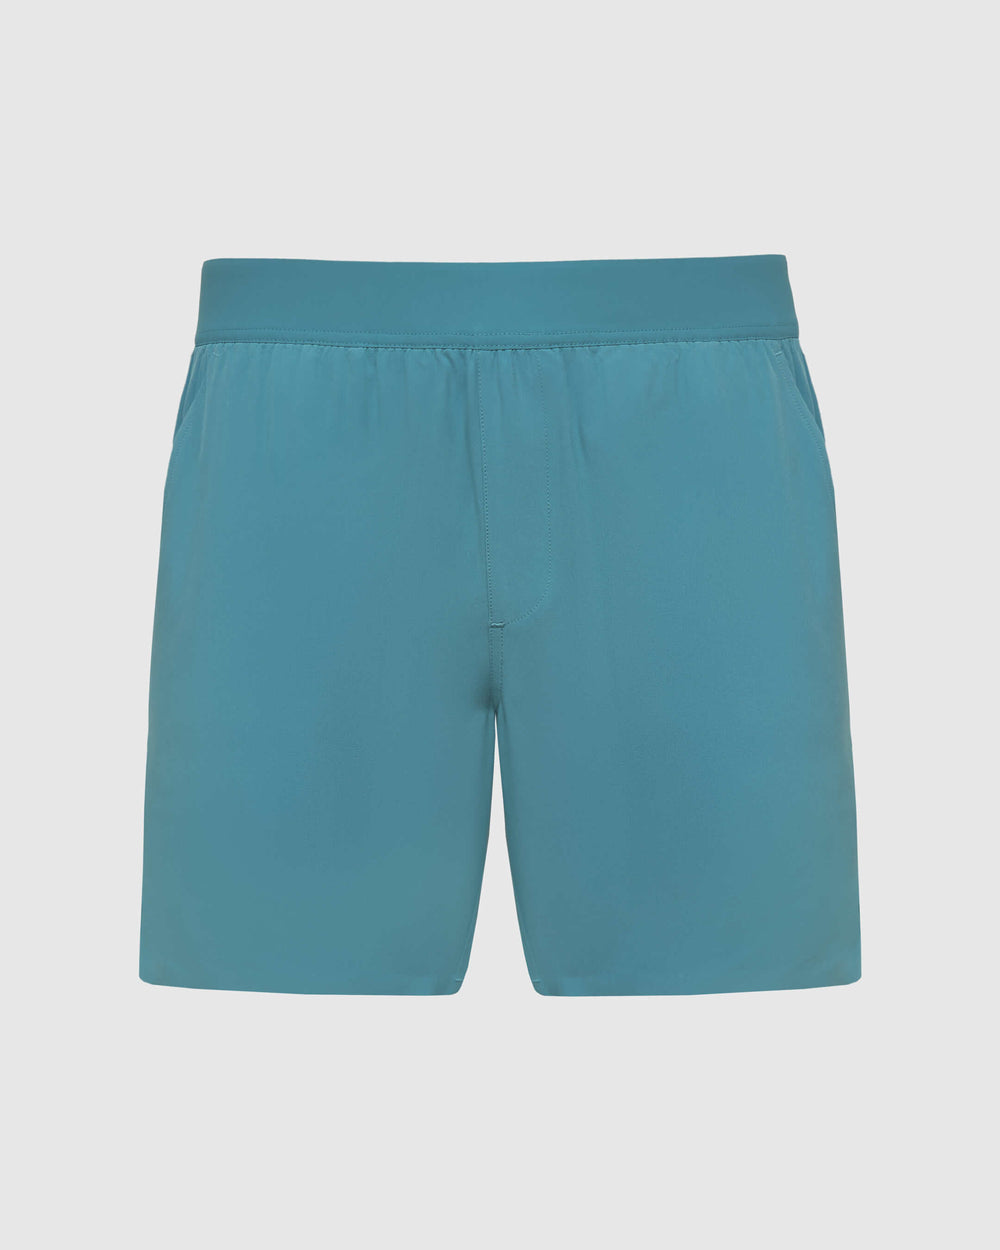 Voyager 7" 2-in-1 Training Shorts